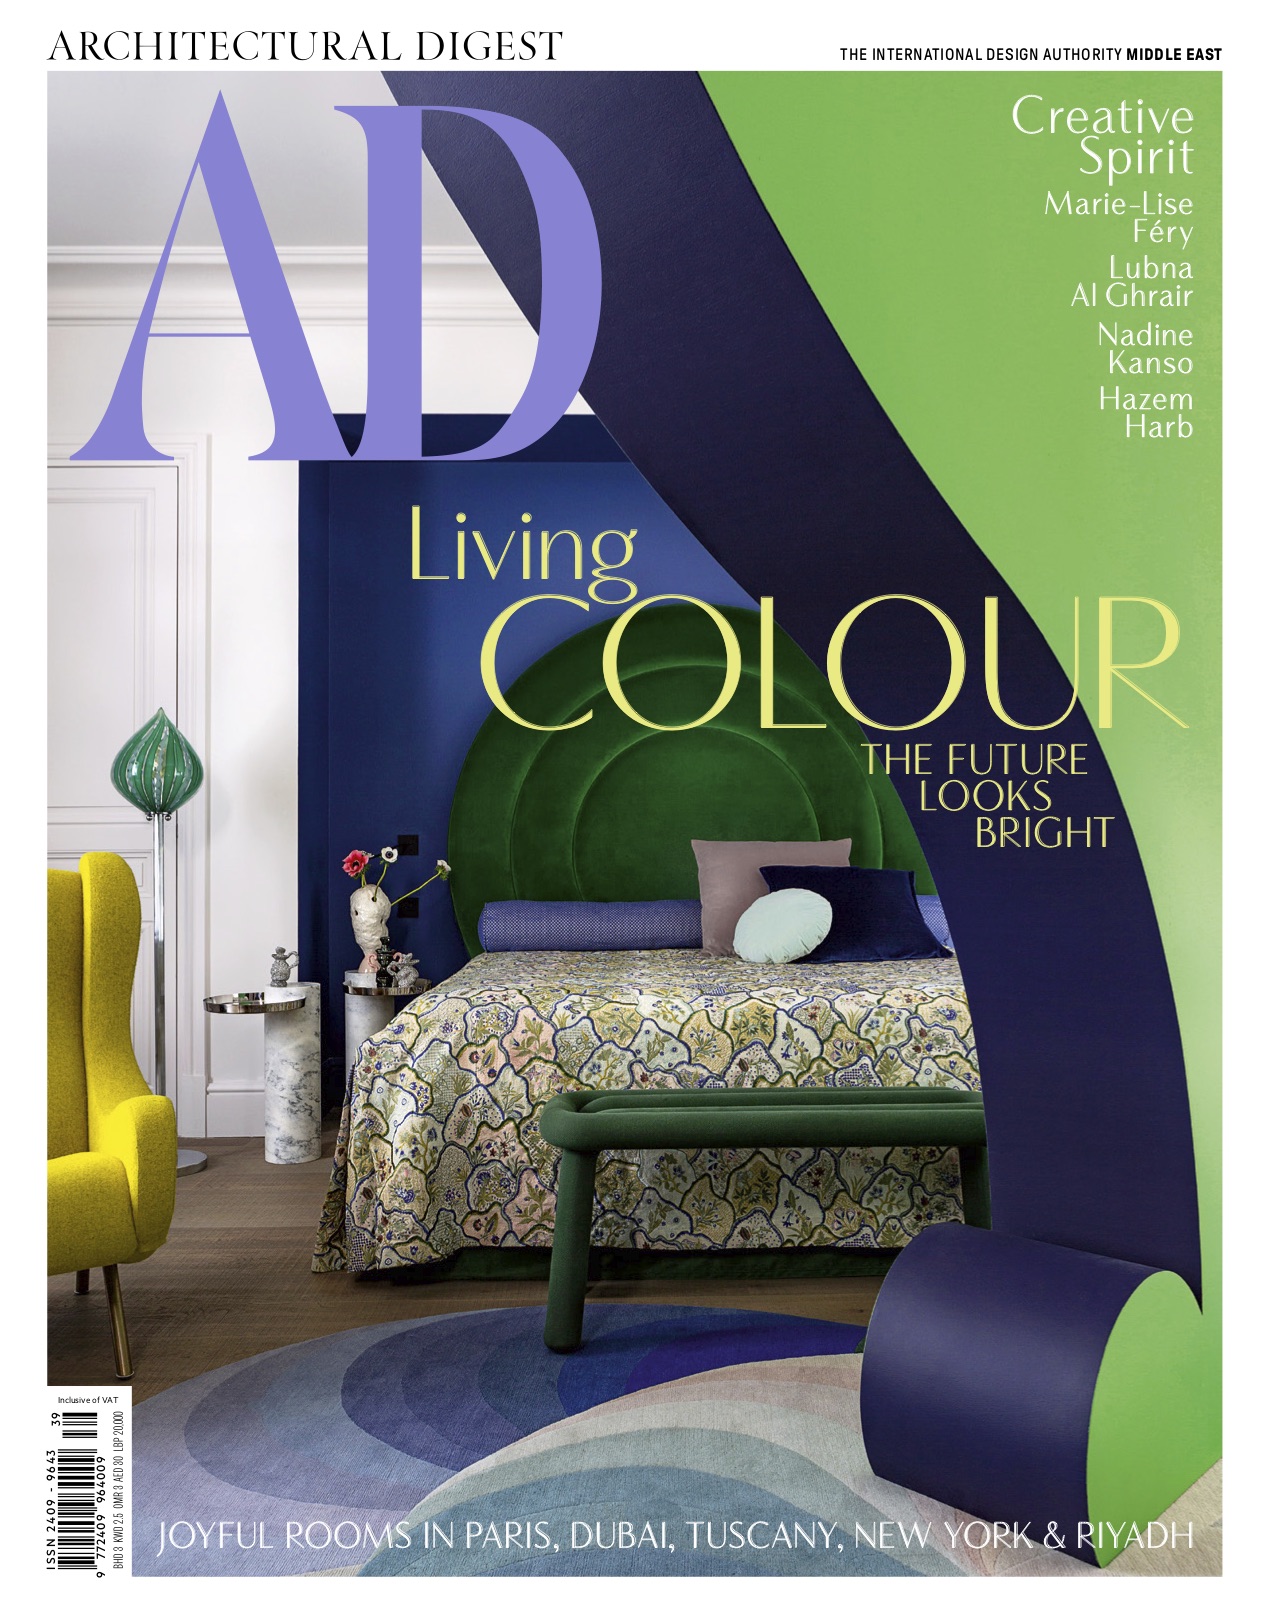 Excess All Areas, Architectural Digest, 2021